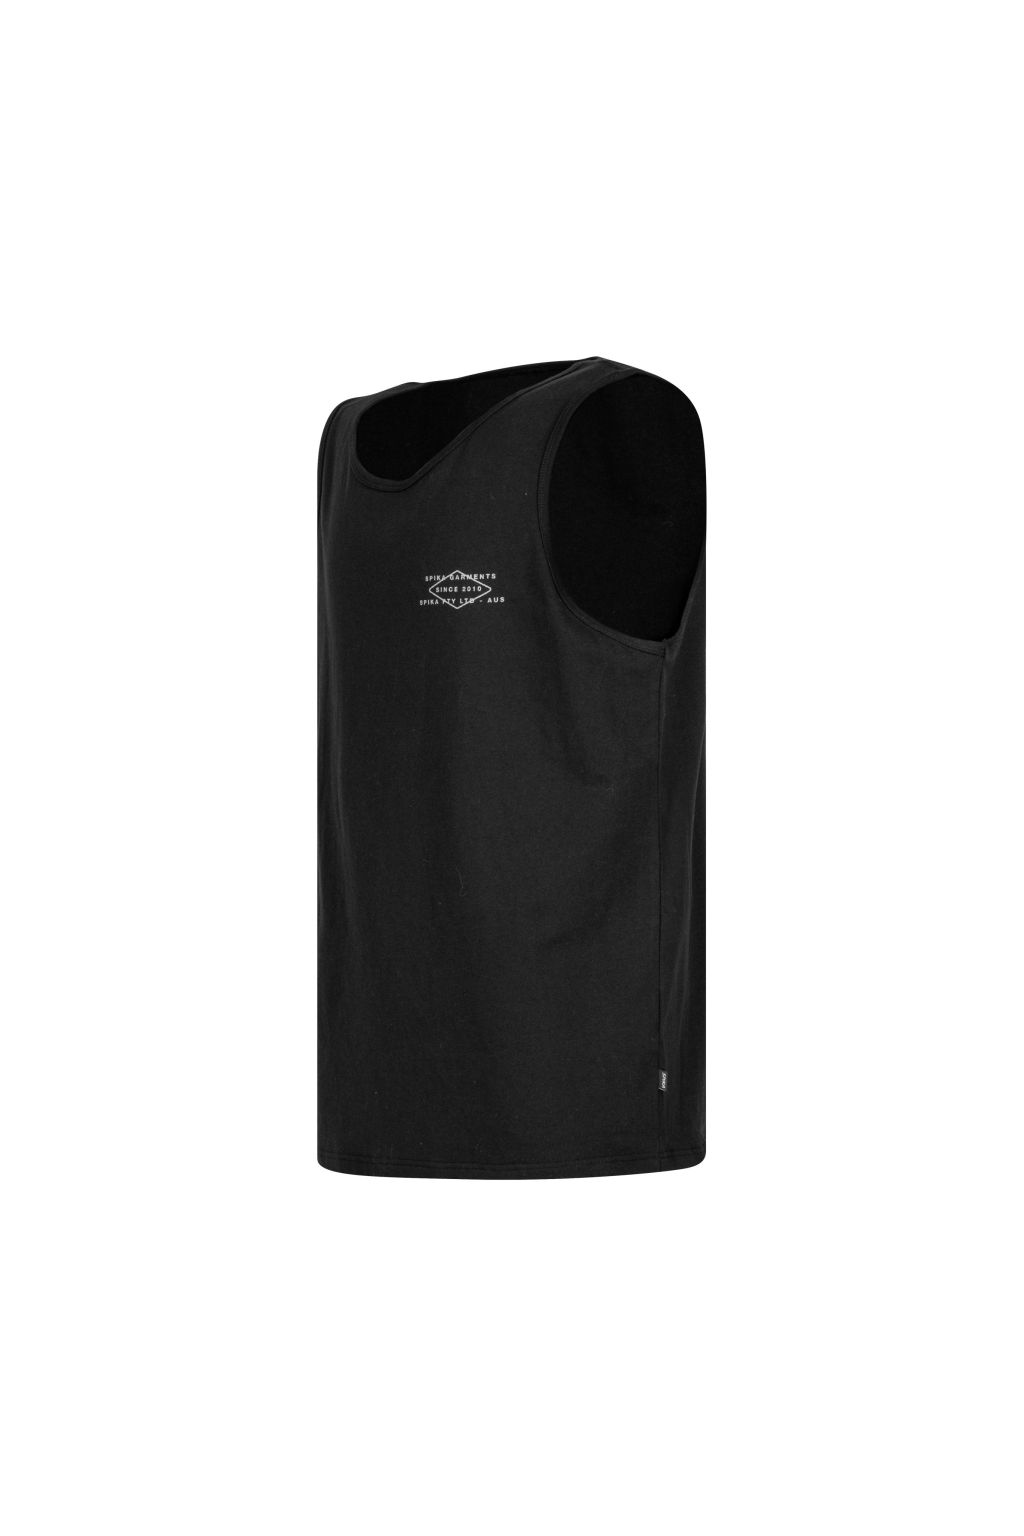 Spika Go Mens Classic Singlet - Black - S - Mansfield Hunting & Fishing - Products to prepare for Corona Virus